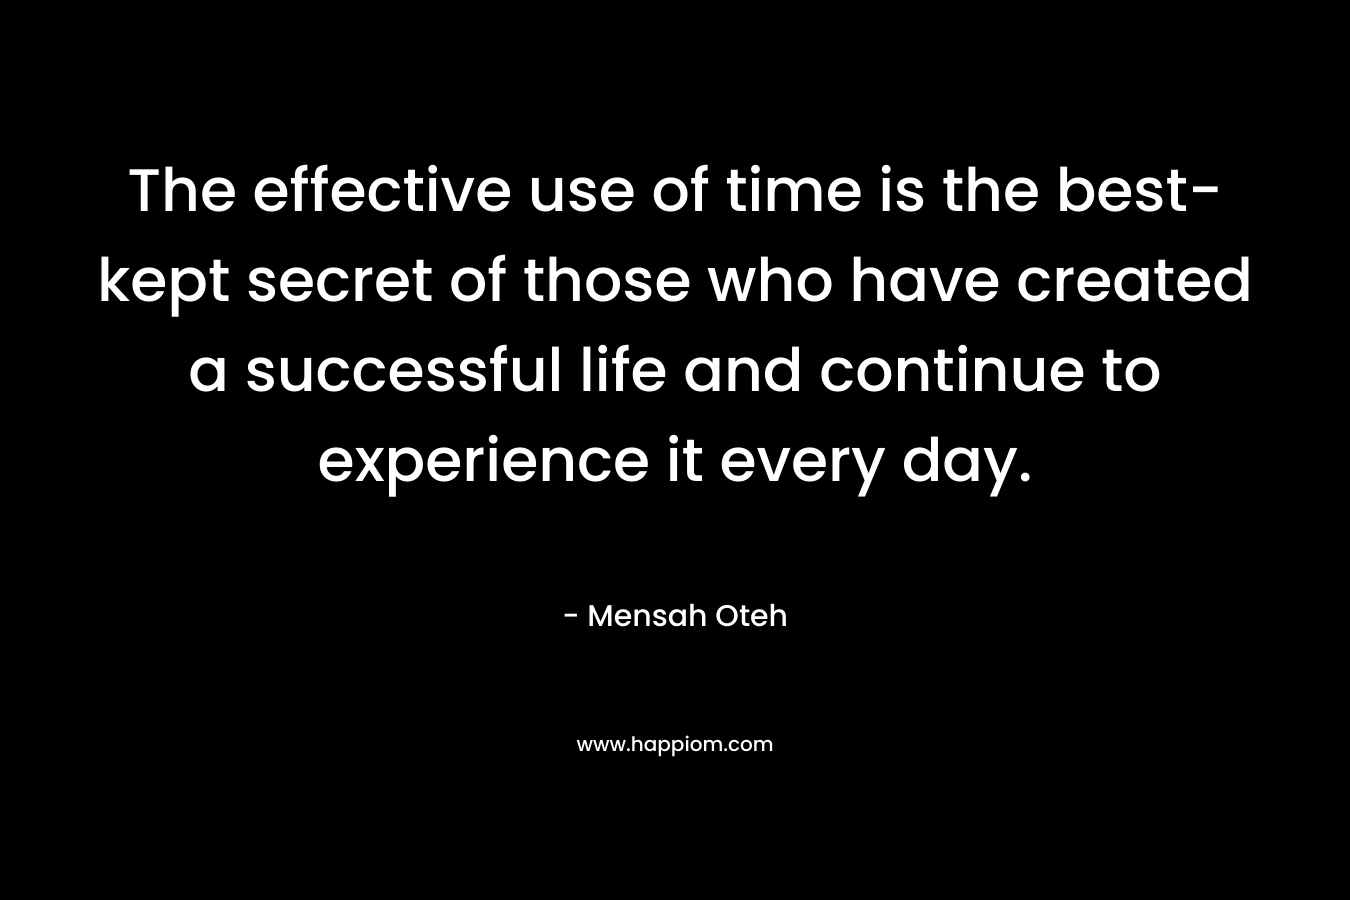 The effective use of time is the best-kept secret of those who have created a successful life and continue to experience it every day.